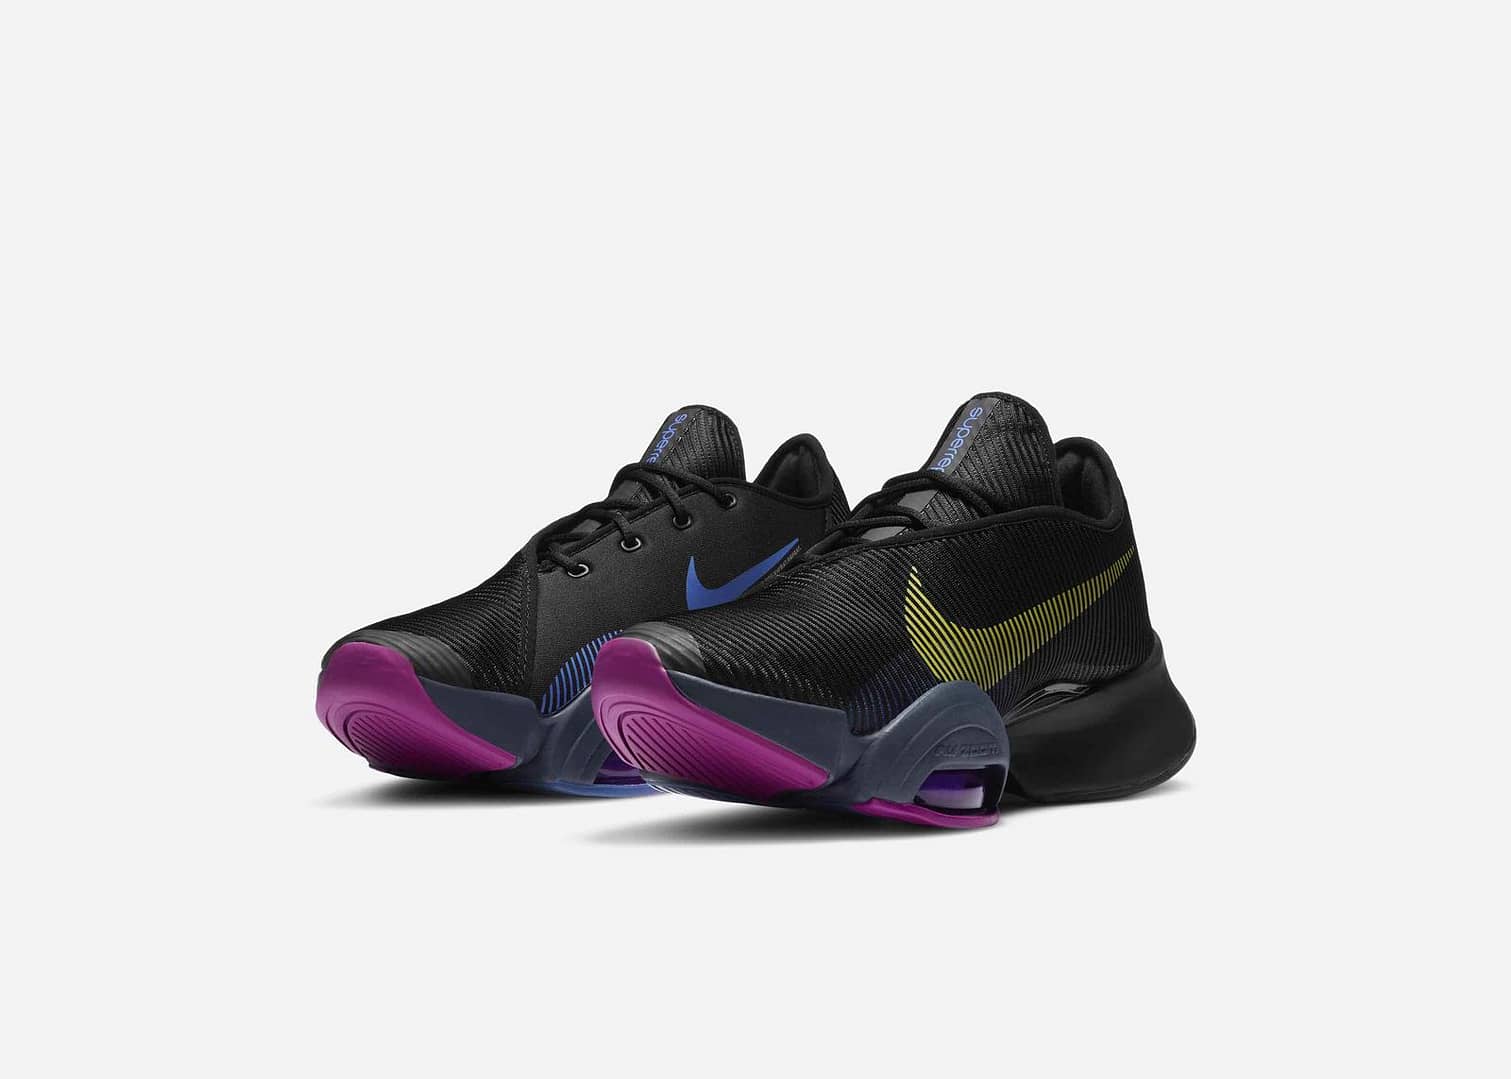 The Nike Air Zoom Superrep 2 Designed For High-intensity Interval ...